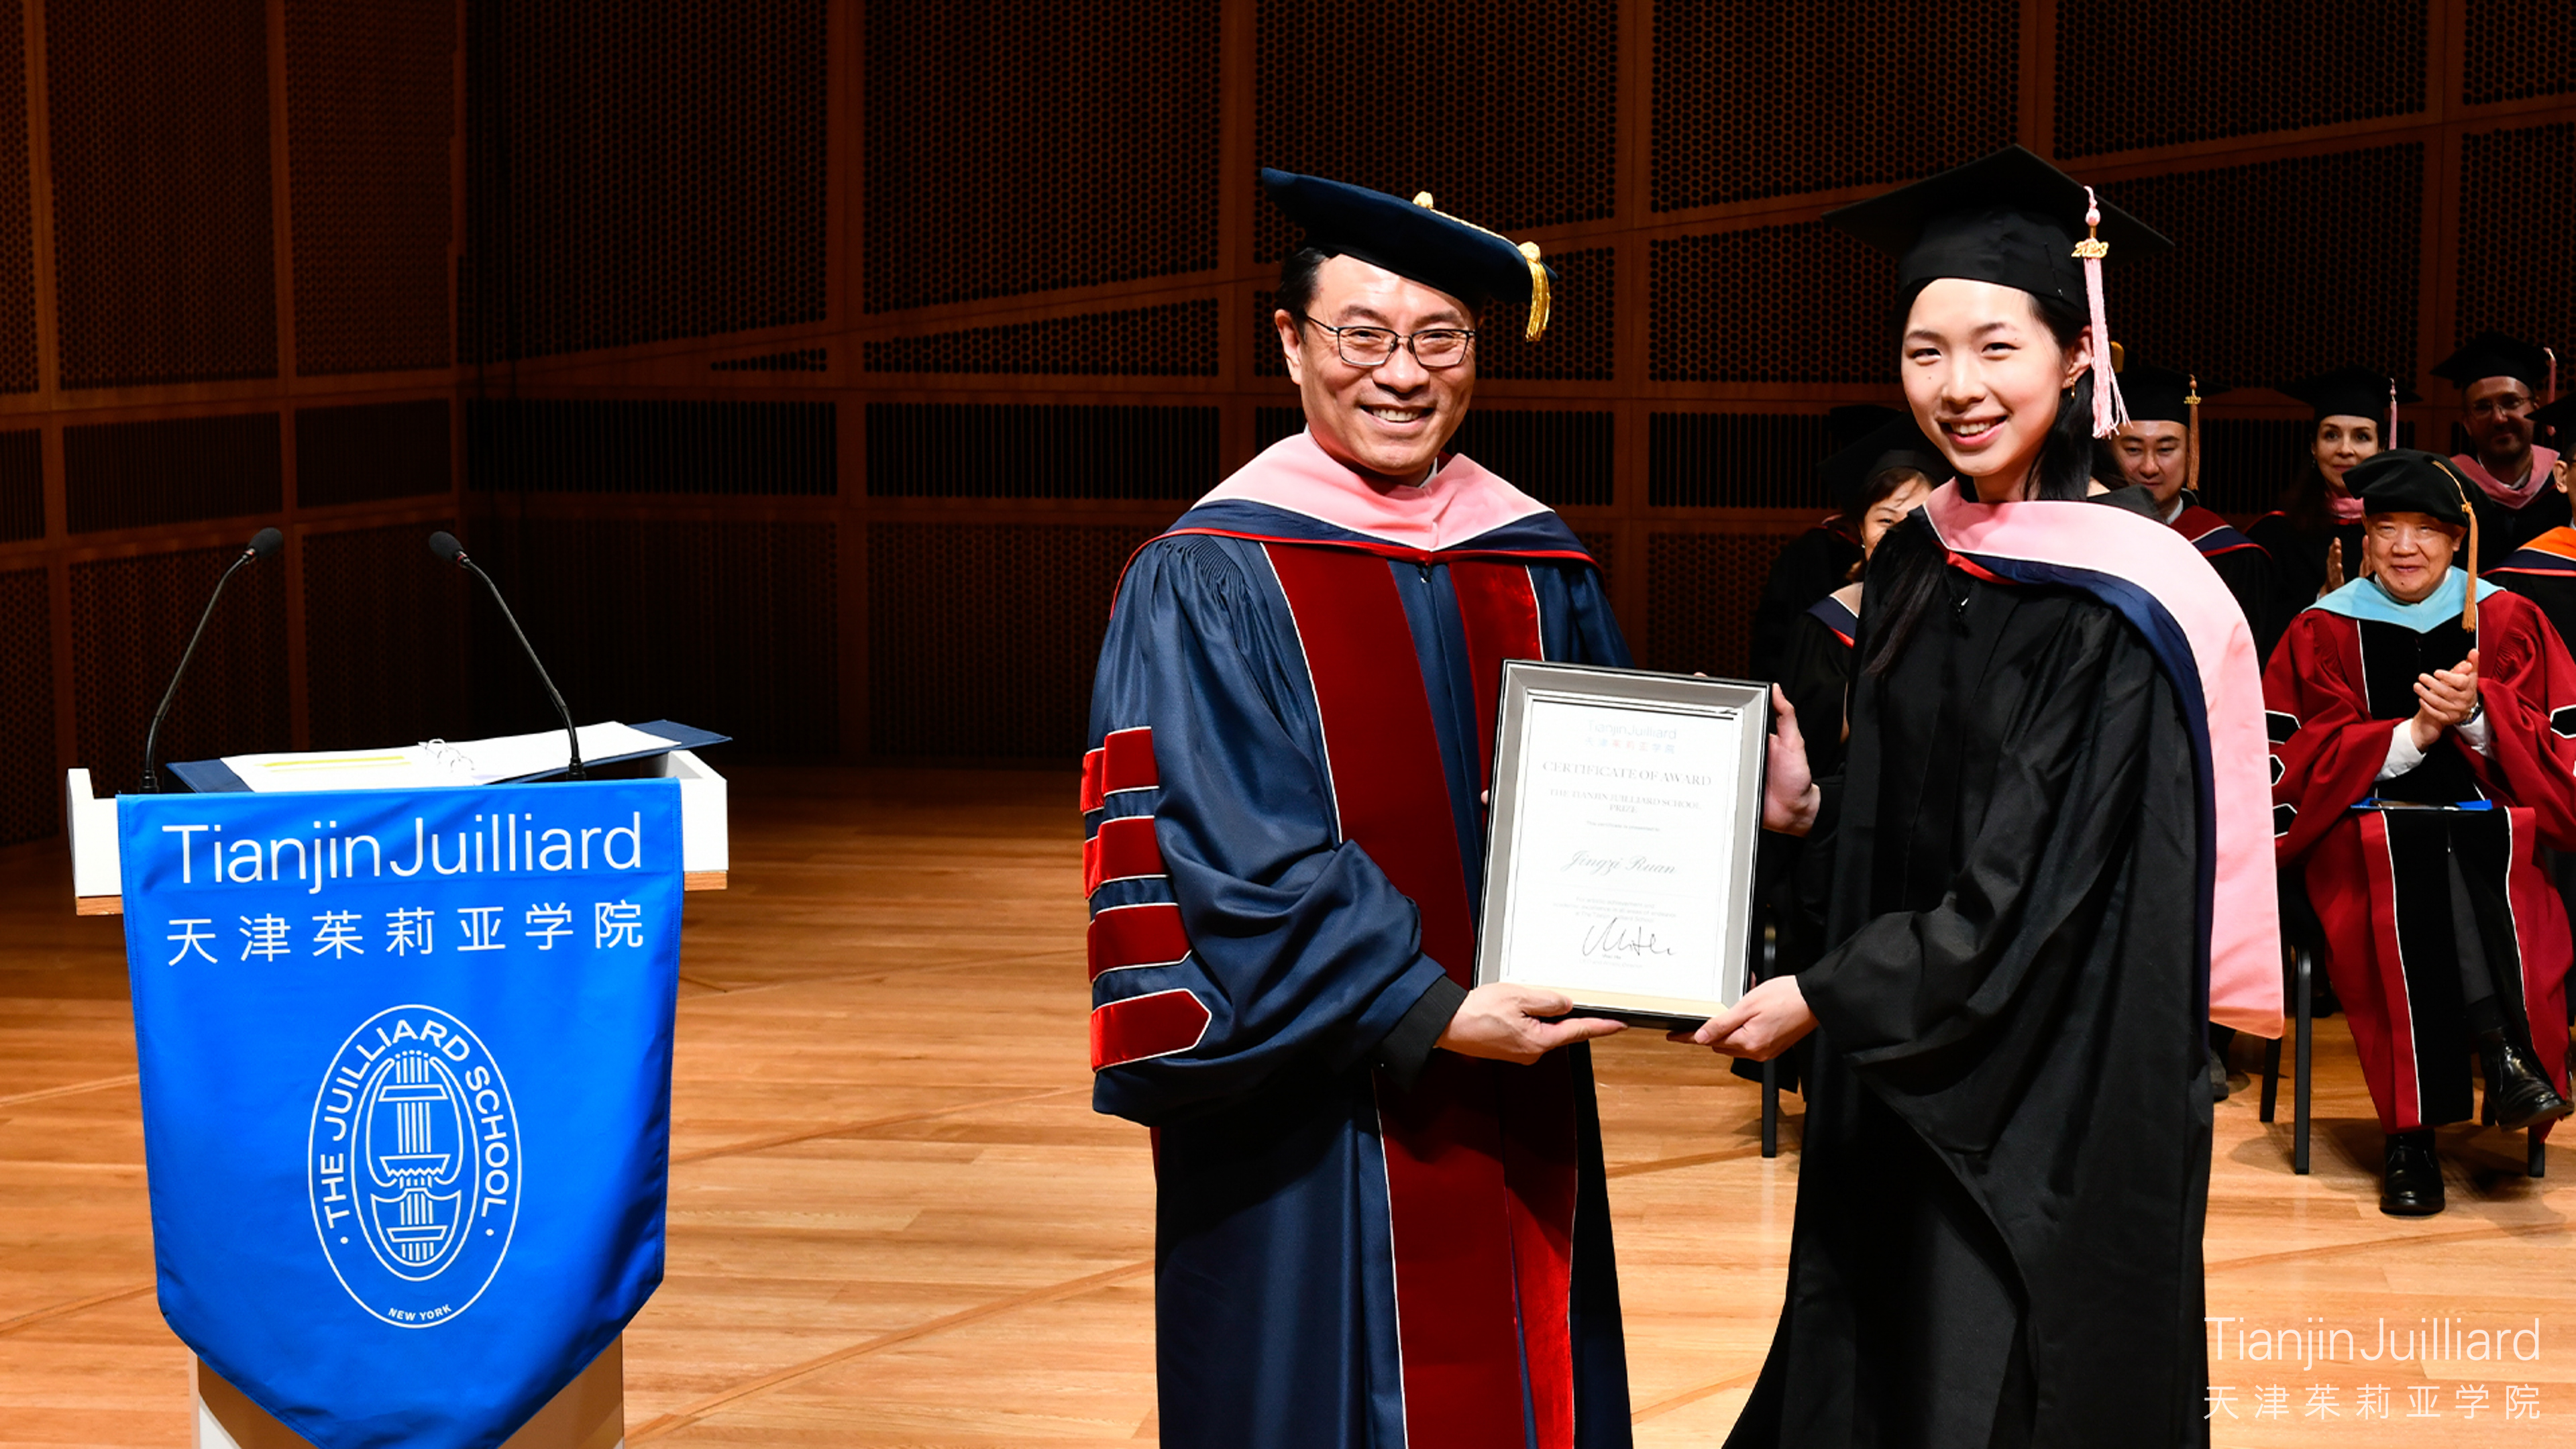 20230519-Commencement prize.jpg